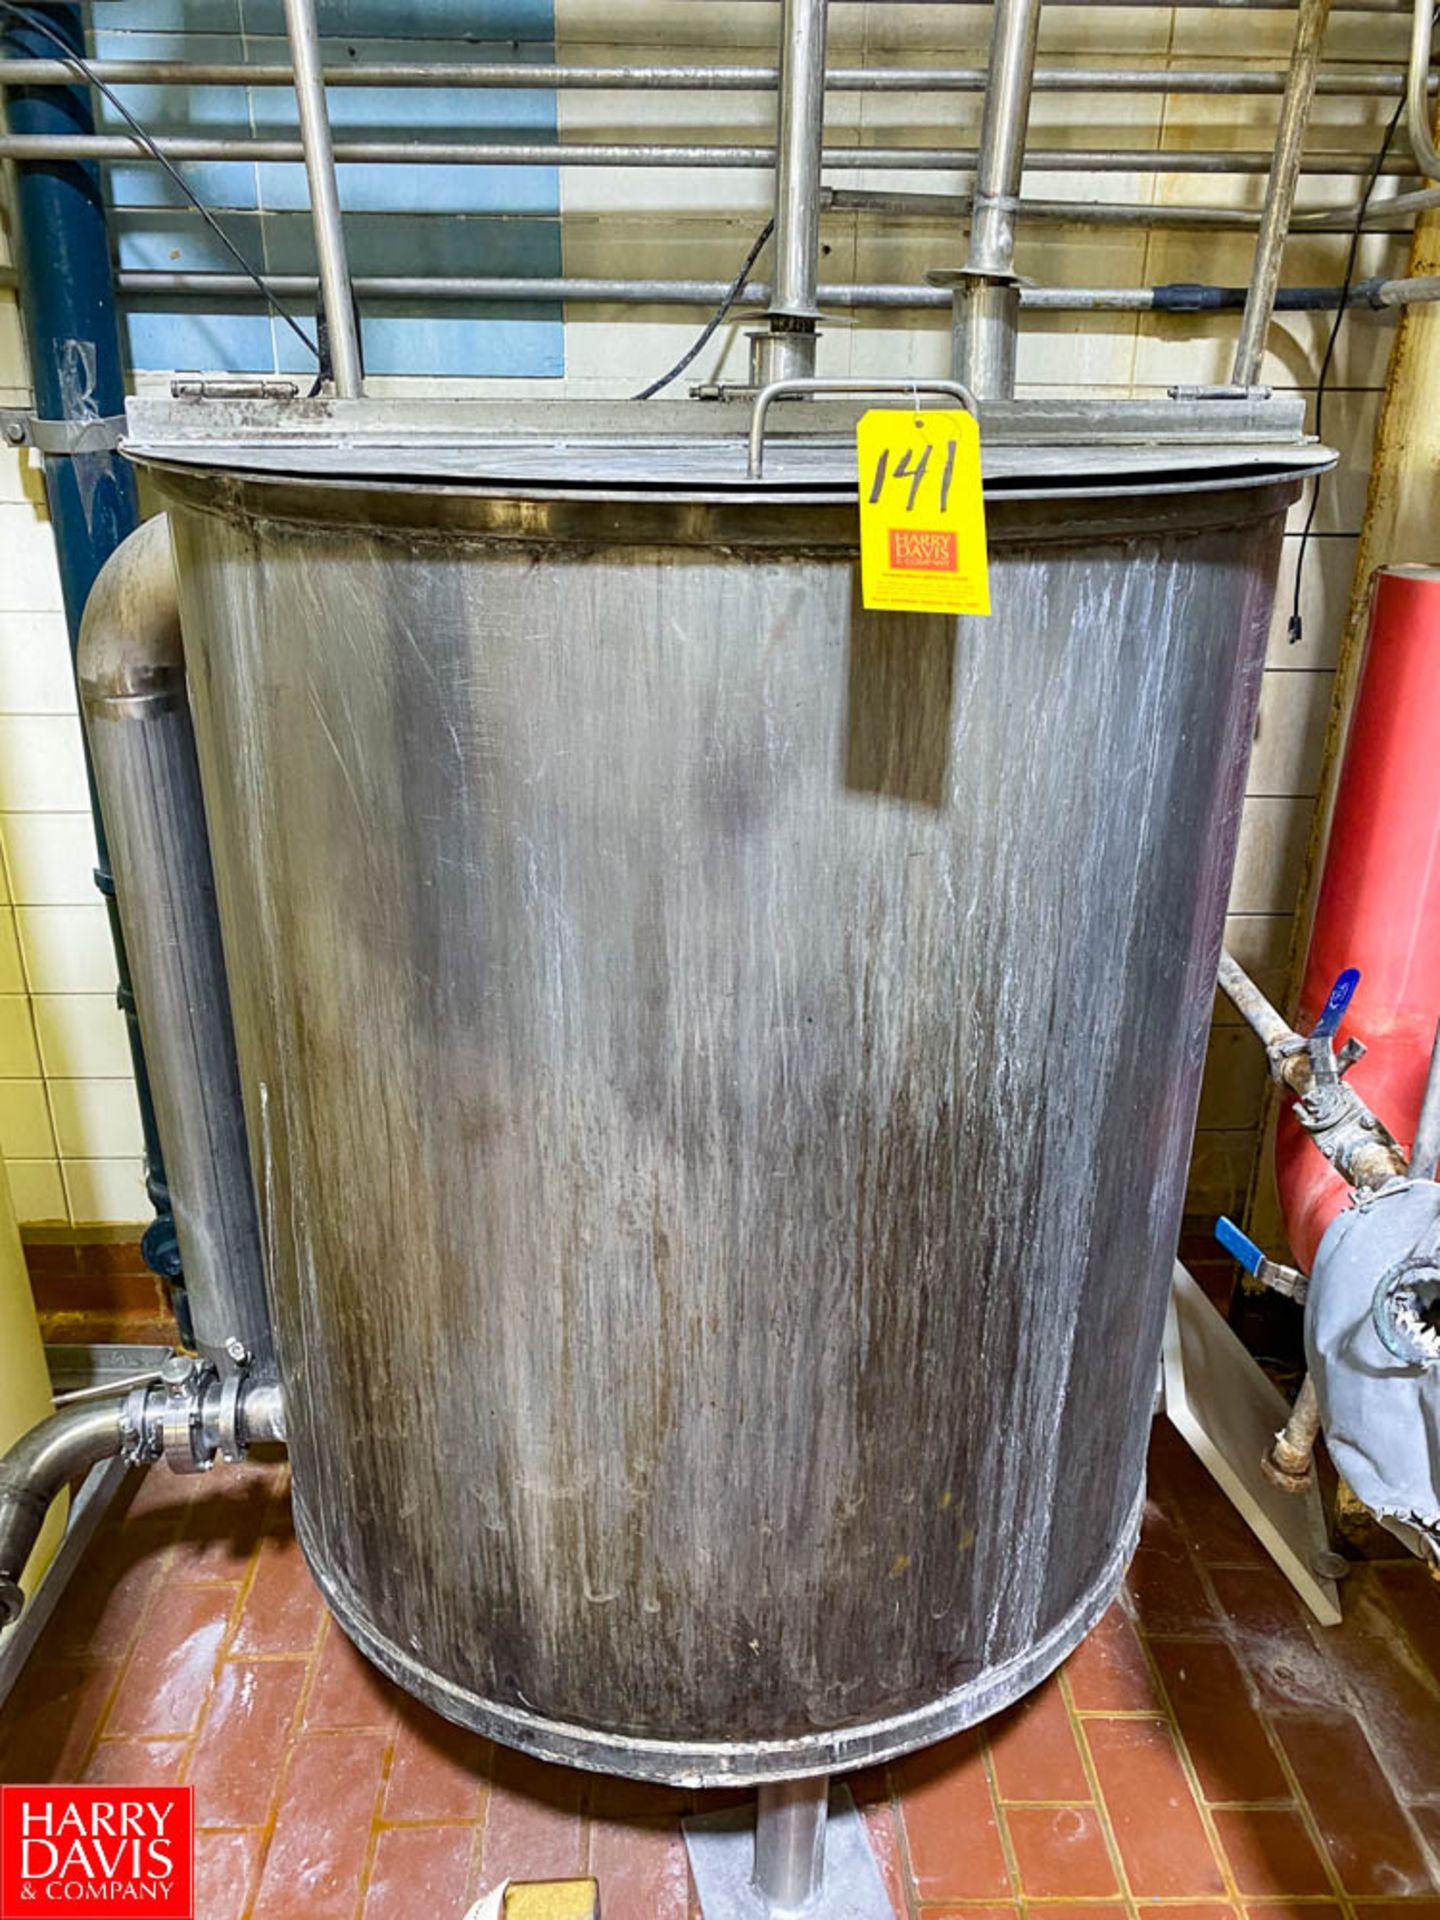 S/S 75 Gallon Single Shell Tank, with Butterfly Valve - Rigging Fee: $200